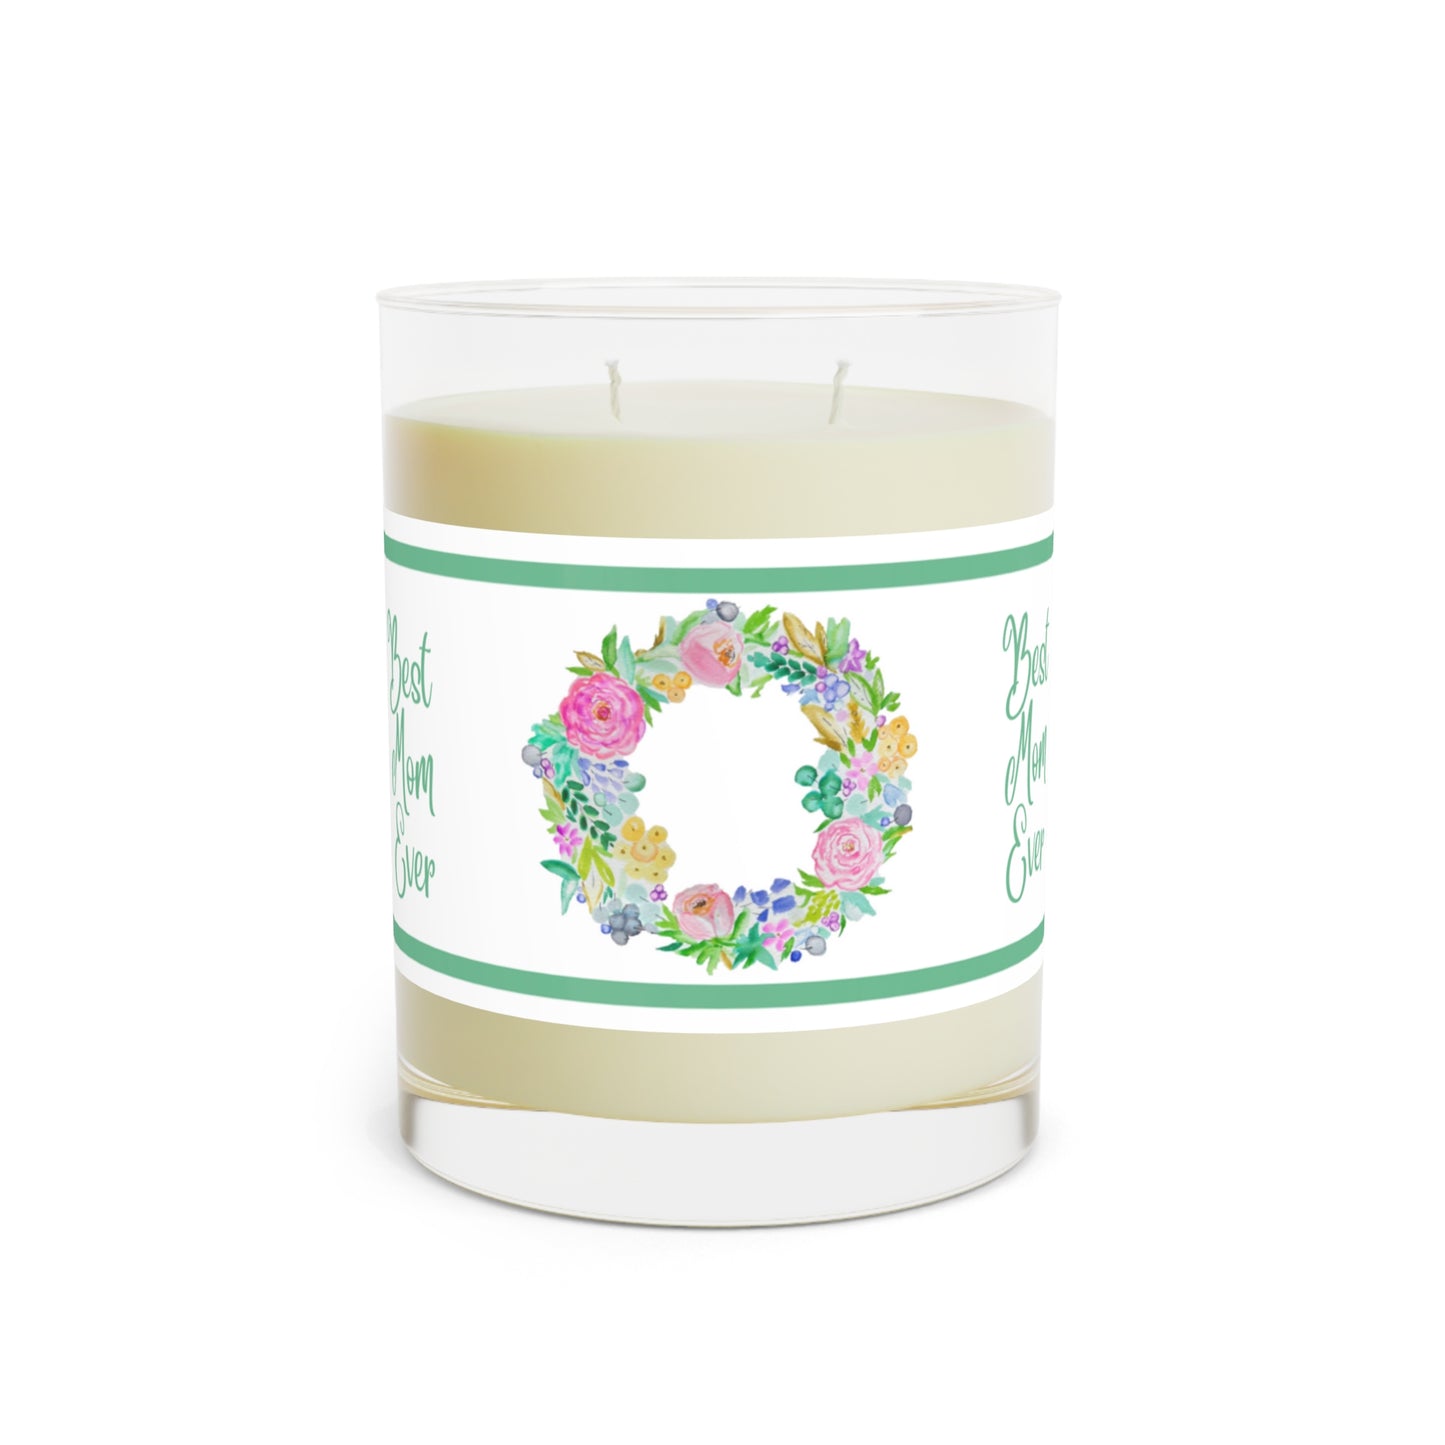 BEST MOM EVER (green) Scented Candle - Full Glass, 11oz Mothers Day Candle, Mom Candle, Gift from Daughter, Gift From Son, Mom Birthday Gift,